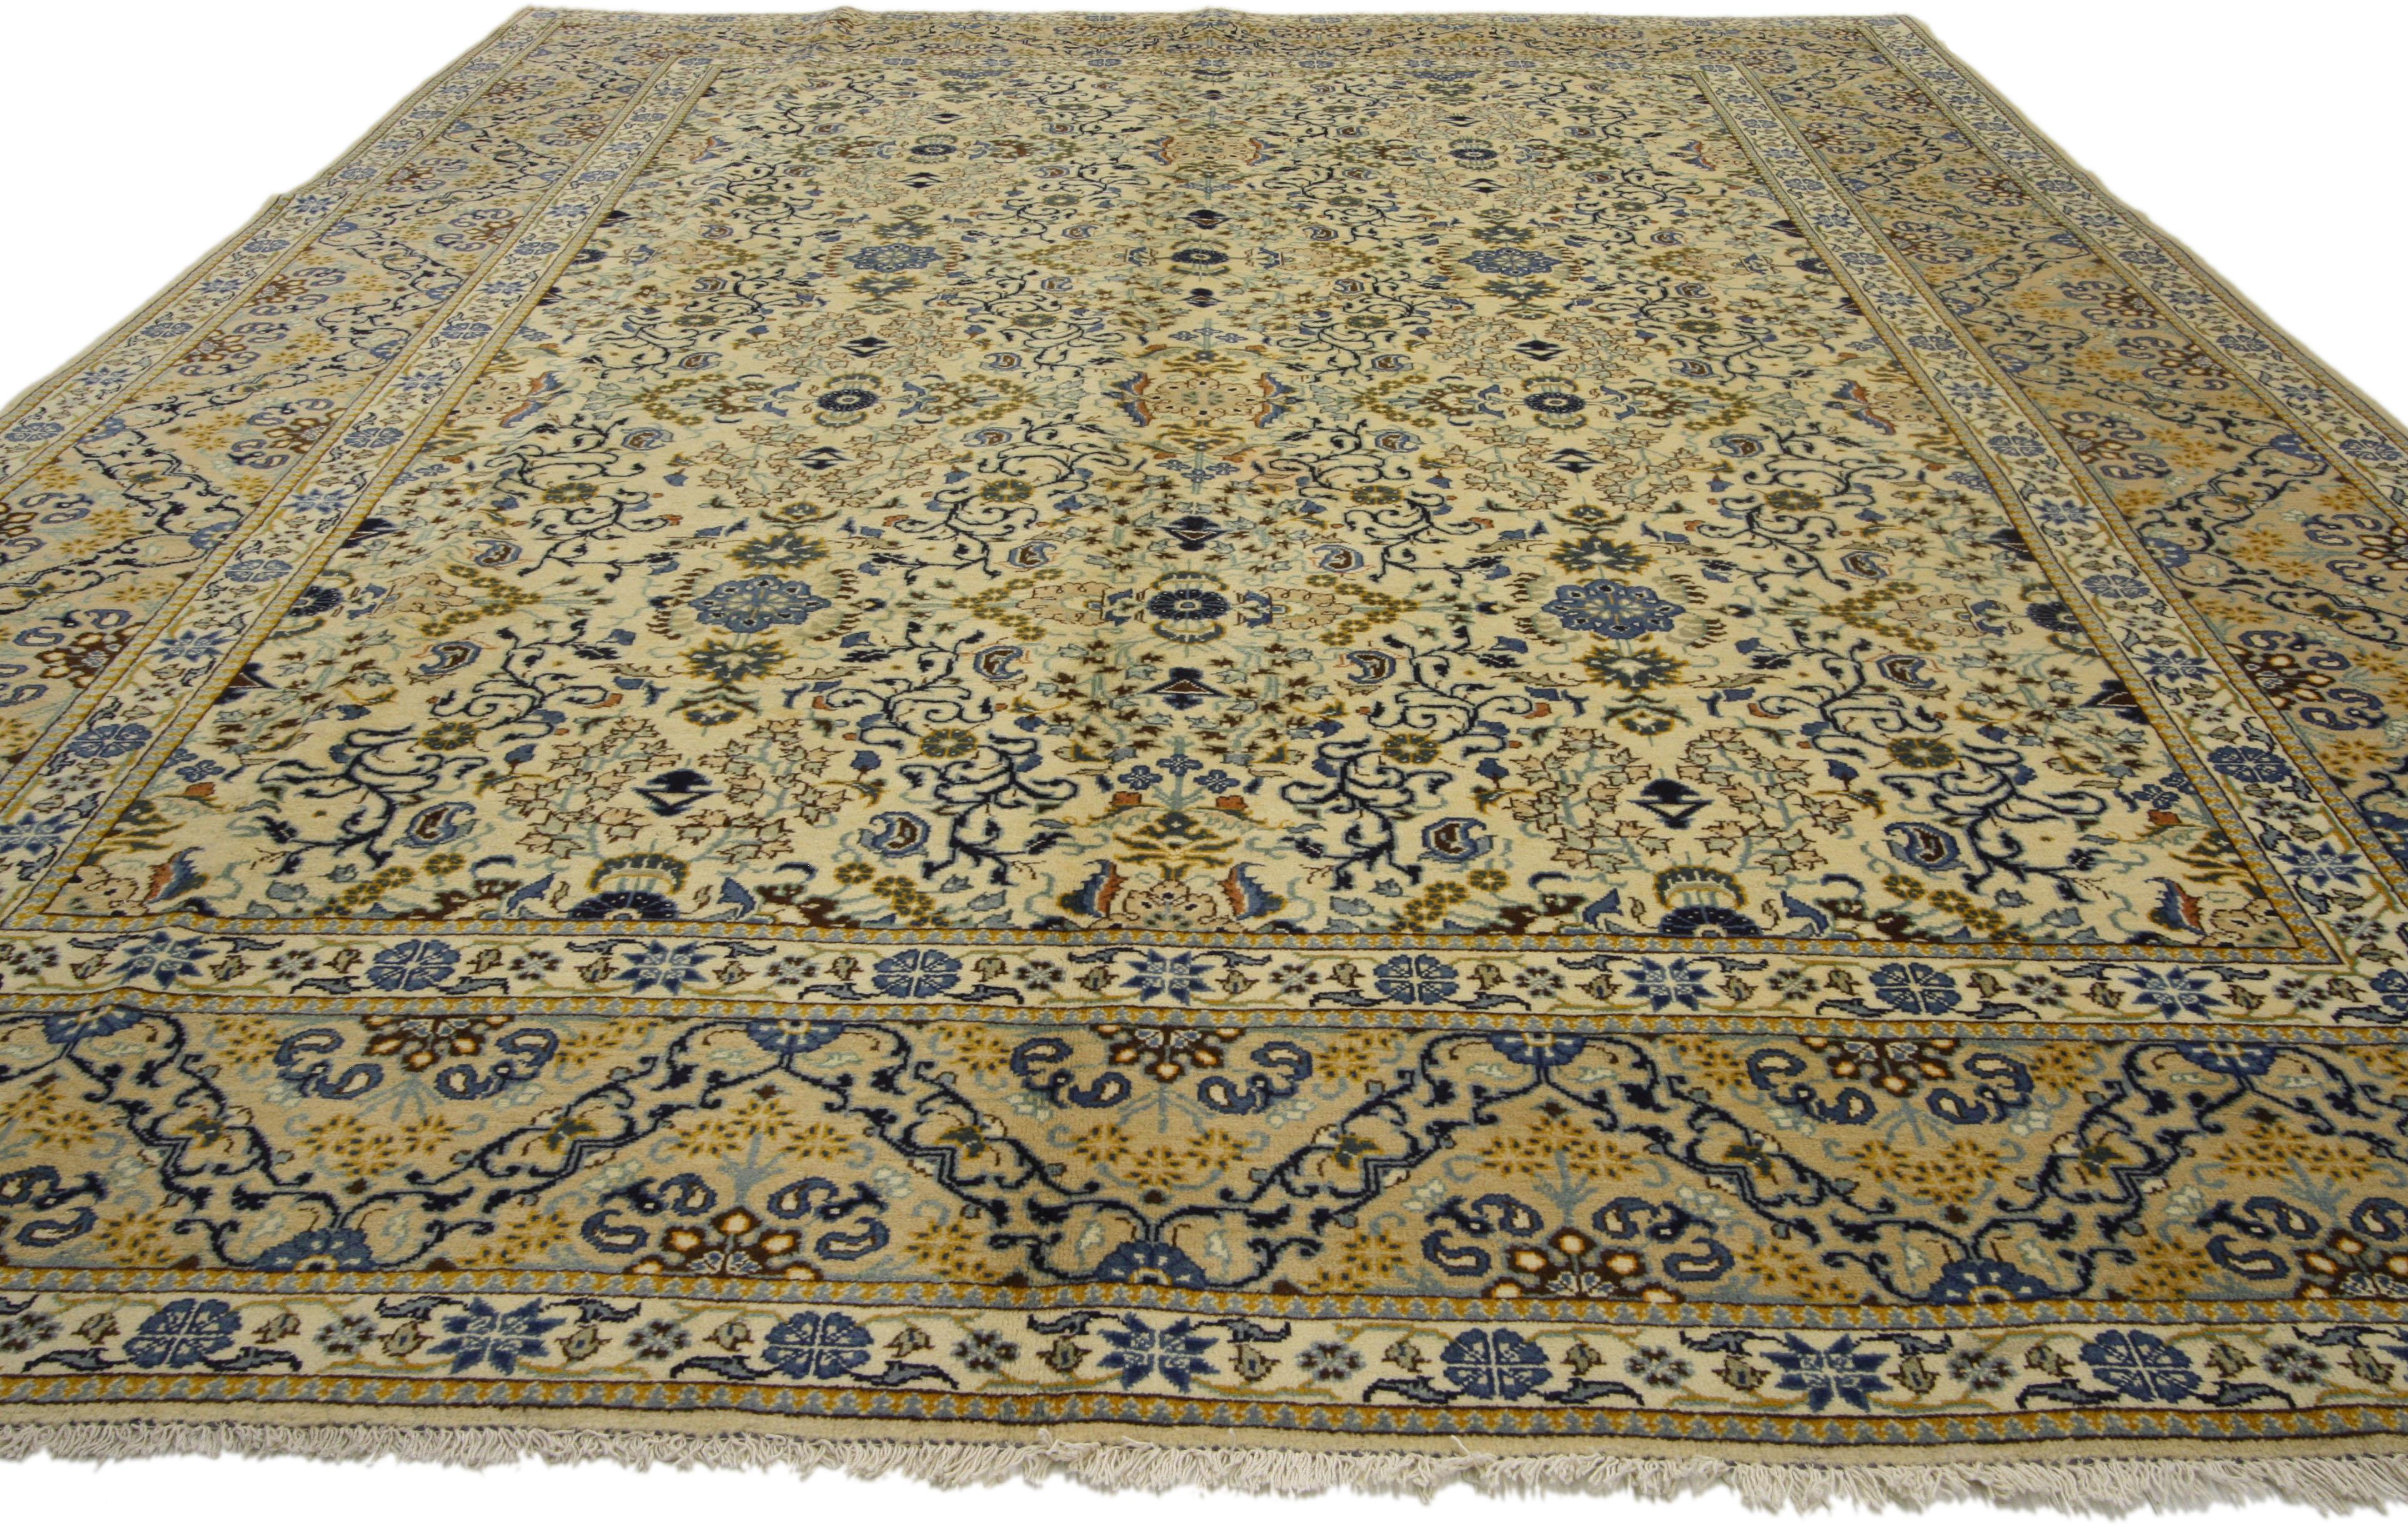 76475 Vintage Persian Kashan Millefleur Rug with Farmhouse Cottage Style 08'04 x 11'06. With architectural elements of curved arabesque forms and decorative detailing, this hand knotted wool vintage Persian Kashan area rug embodies a combination of